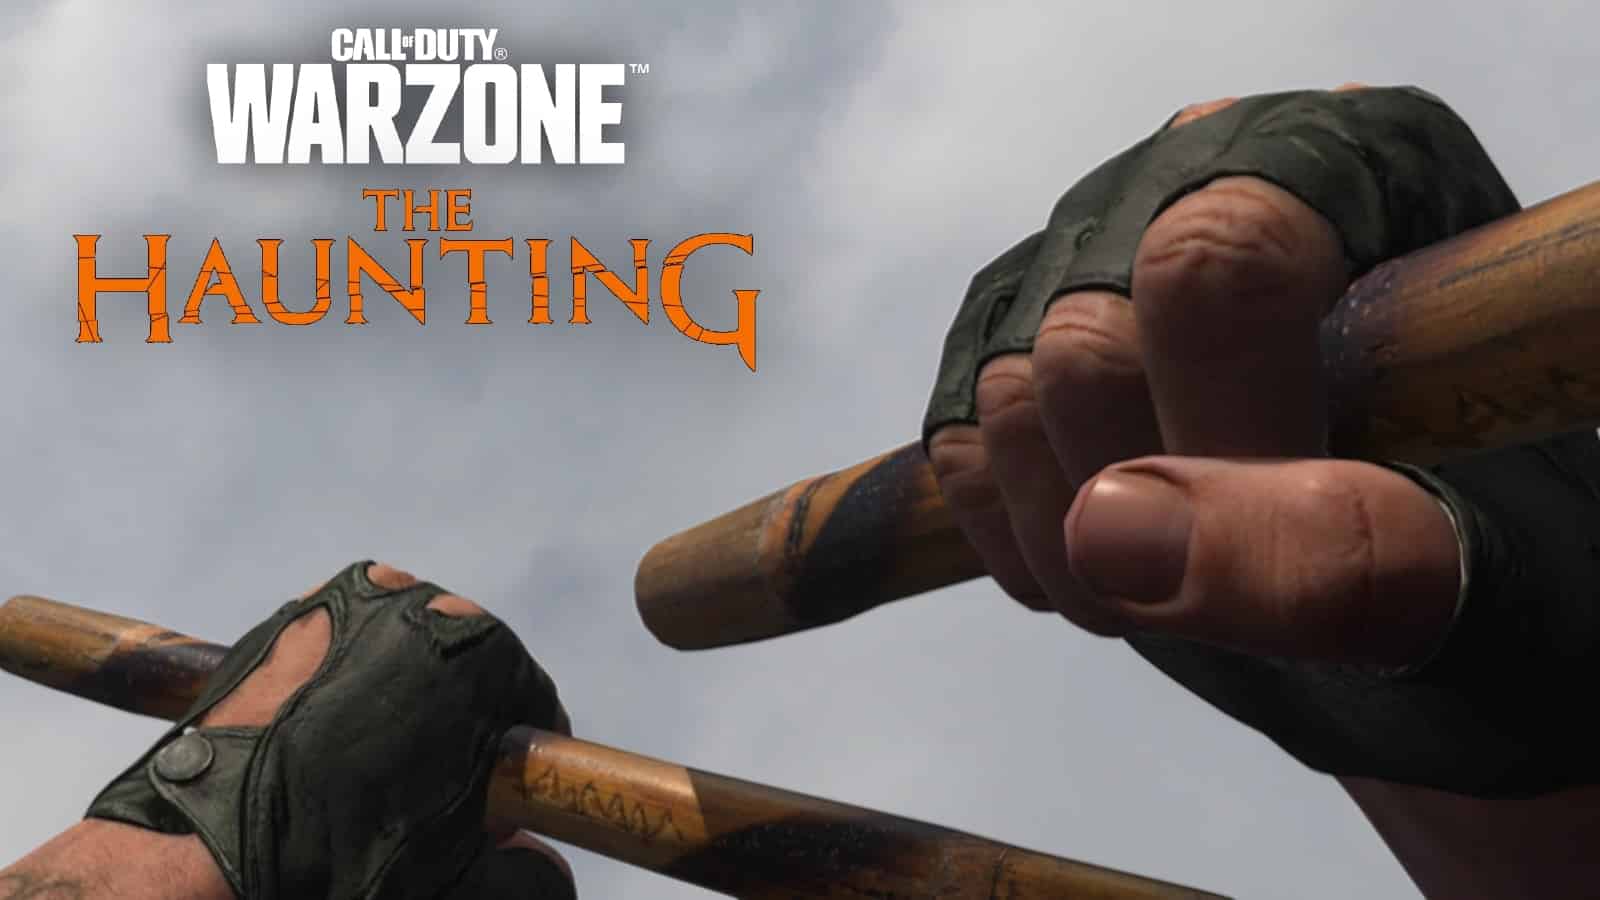 Warzone Kali Sticks with Warzone and The Haunting logo